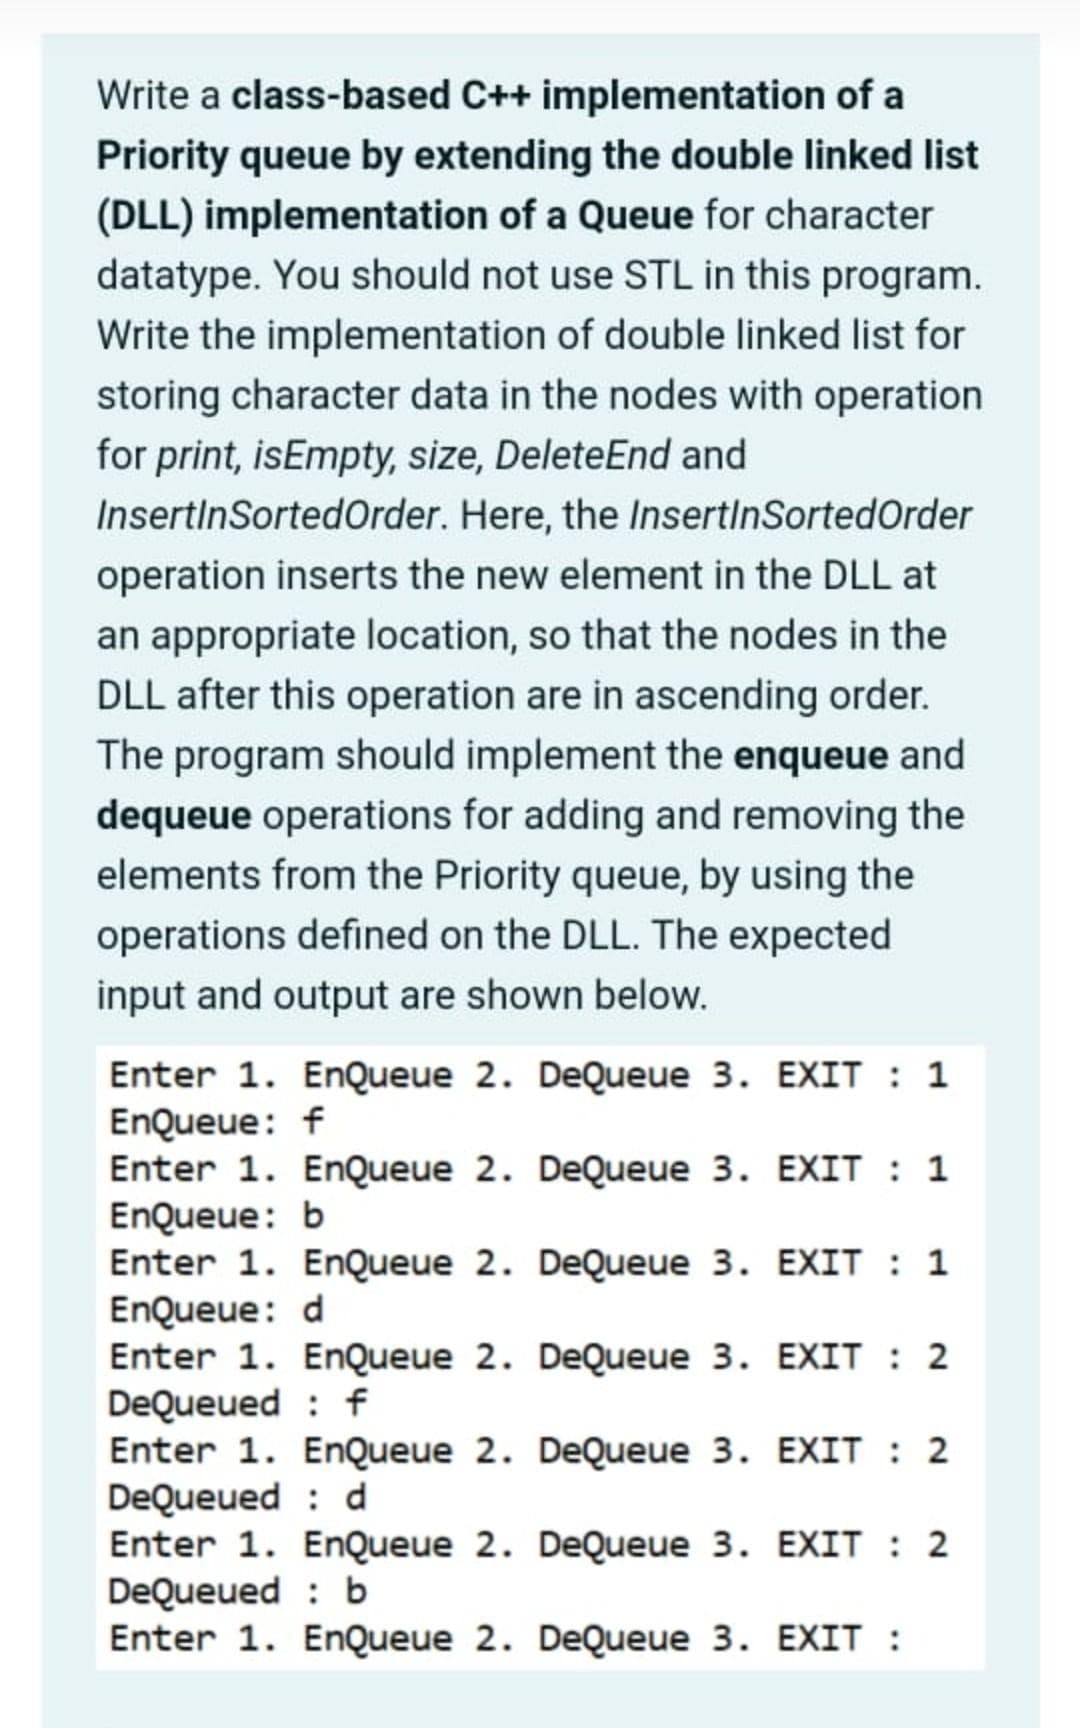 Write a class-based C++ implementation of a
Priority queue by extending the double linked list
(DLL) implementation of a Queue for character
datatype. You should not use STL in this program.
Write the implementation of double linked list for
storing character data in the nodes with operation
for print, isEmpty, size, Delete End and
InsertinSortedOrder. Here, the InsertinSorted Order
operation inserts the new element in the DLL at
an appropriate location, so that the nodes in the
DLL after this operation are in ascending order.
The program should implement the enqueue and
dequeue operations for adding and removing the
elements from the Priority queue, by using the
operations defined on the DLL. The expected
input and output are shown below.
Enter 1. EnQueue 2. DeQueue 3. EXIT : 1
EnQueue: f
Enter 1. EnQueue 2. DeQueue 3. EXIT : 1
EnQueue: b
Enter 1. EnQueue 2. DeQueue 3. EXIT : 1
EnQueue: d
Enter 1. EnQueue 2. DeQueue 3.
EXIT : 2
DeQueued f
EXIT : 2
Enter 1. EnQueue 2. DeQueue 3.
EXIT : 2
DeQueued b
Enter 1. EnQueue 2. DeQueue 3. EXIT :
Enter 1. EnQueue 2. DeQueue 3.
DeQueued d